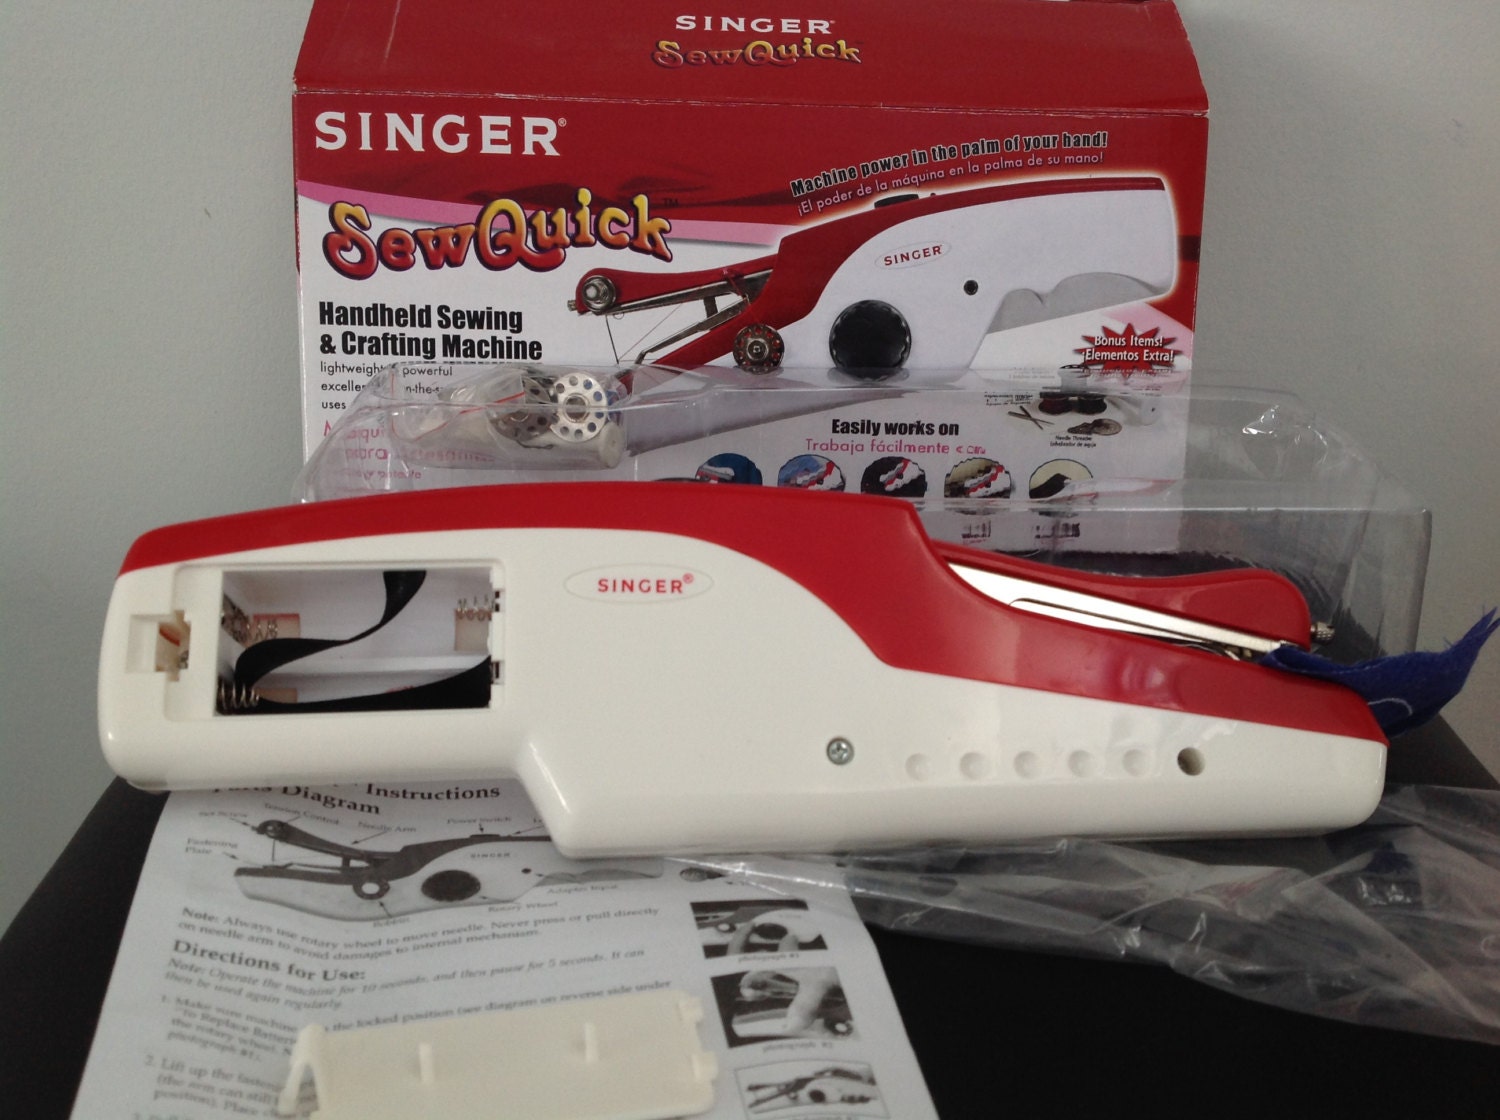 Singer Stitch Sew Quick Hand Held Sewing & by VintageTreasures2day